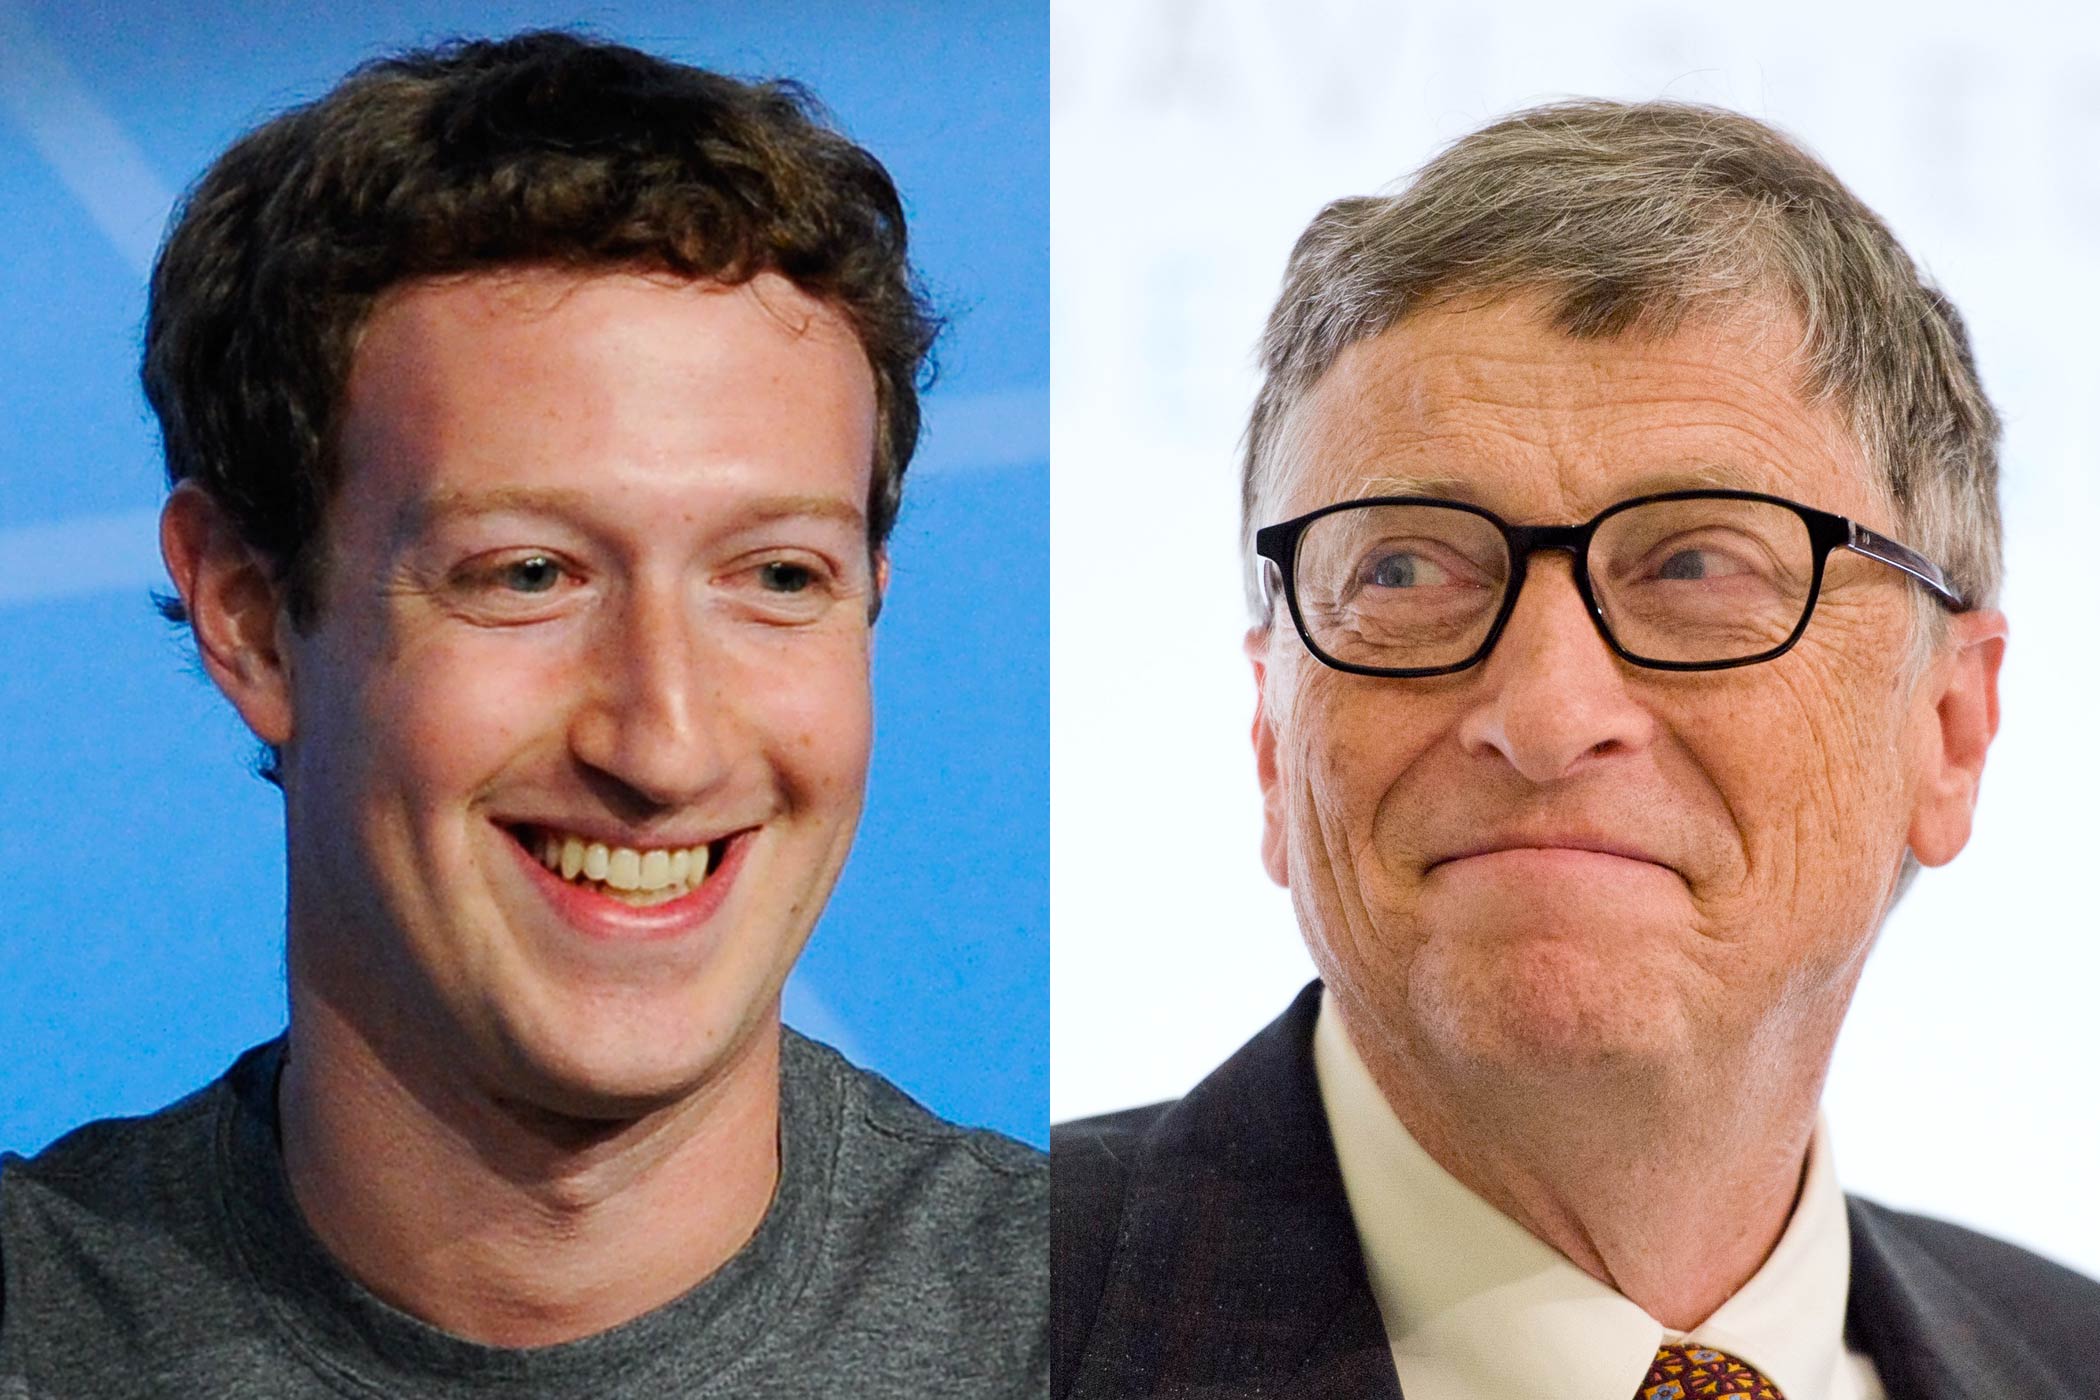 From left: Mark Zuckerberg and Bill Gates (Getty Images (2))